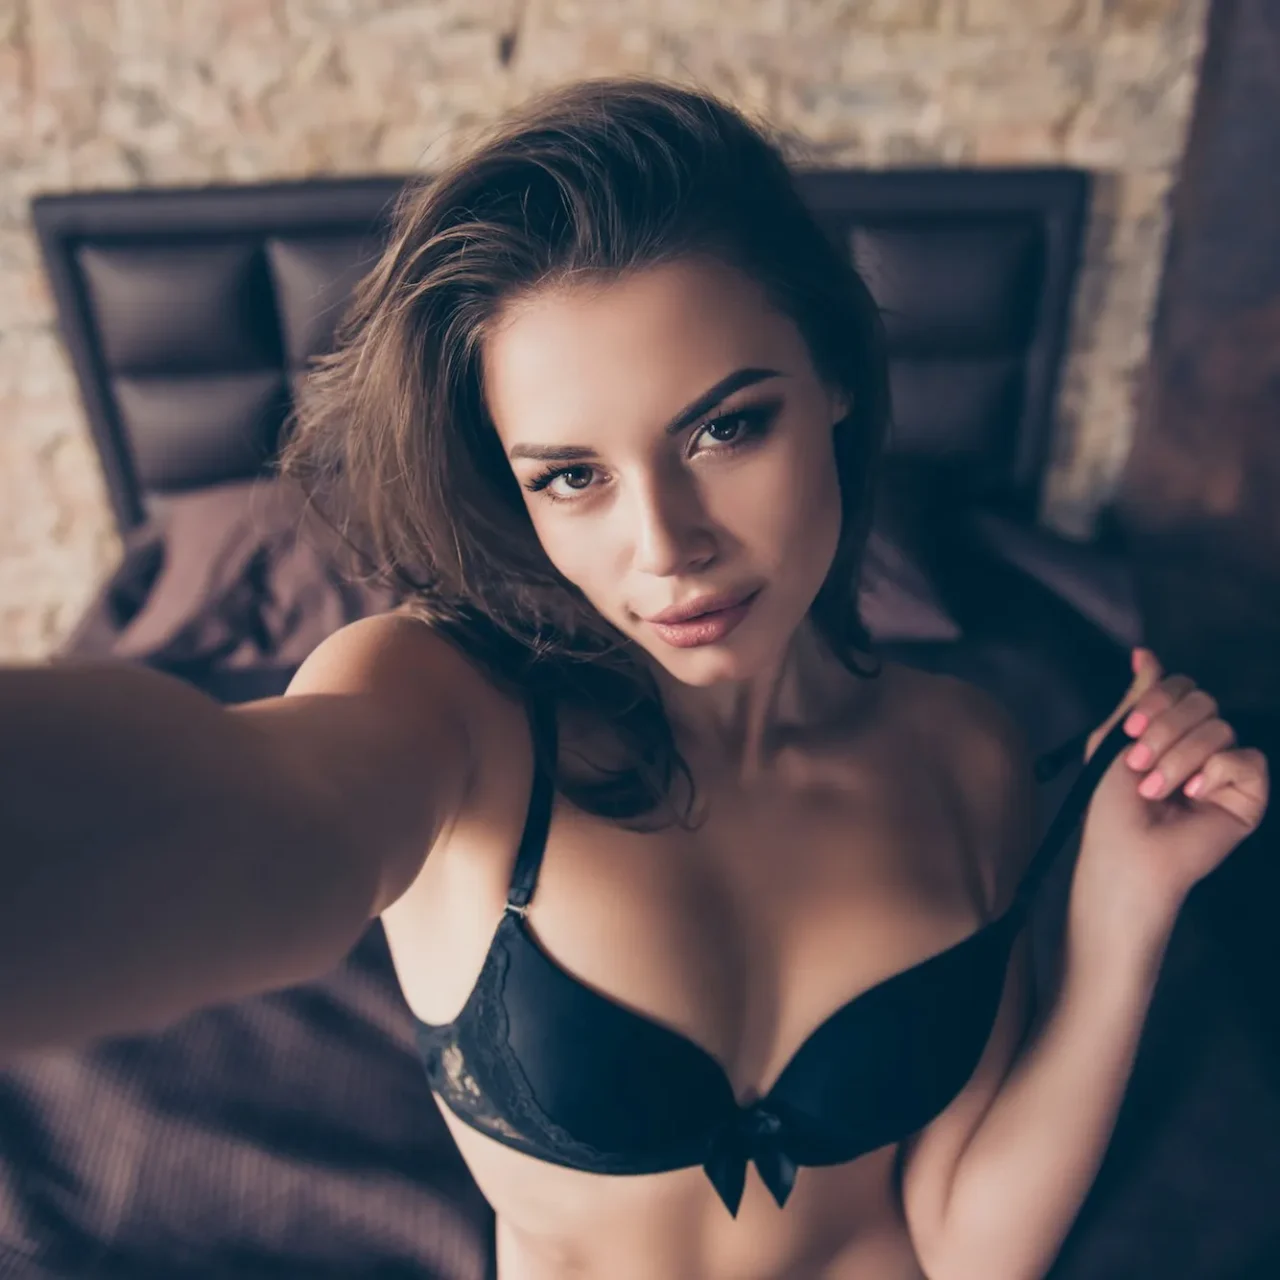 Tips to take a stunning sexy selfie